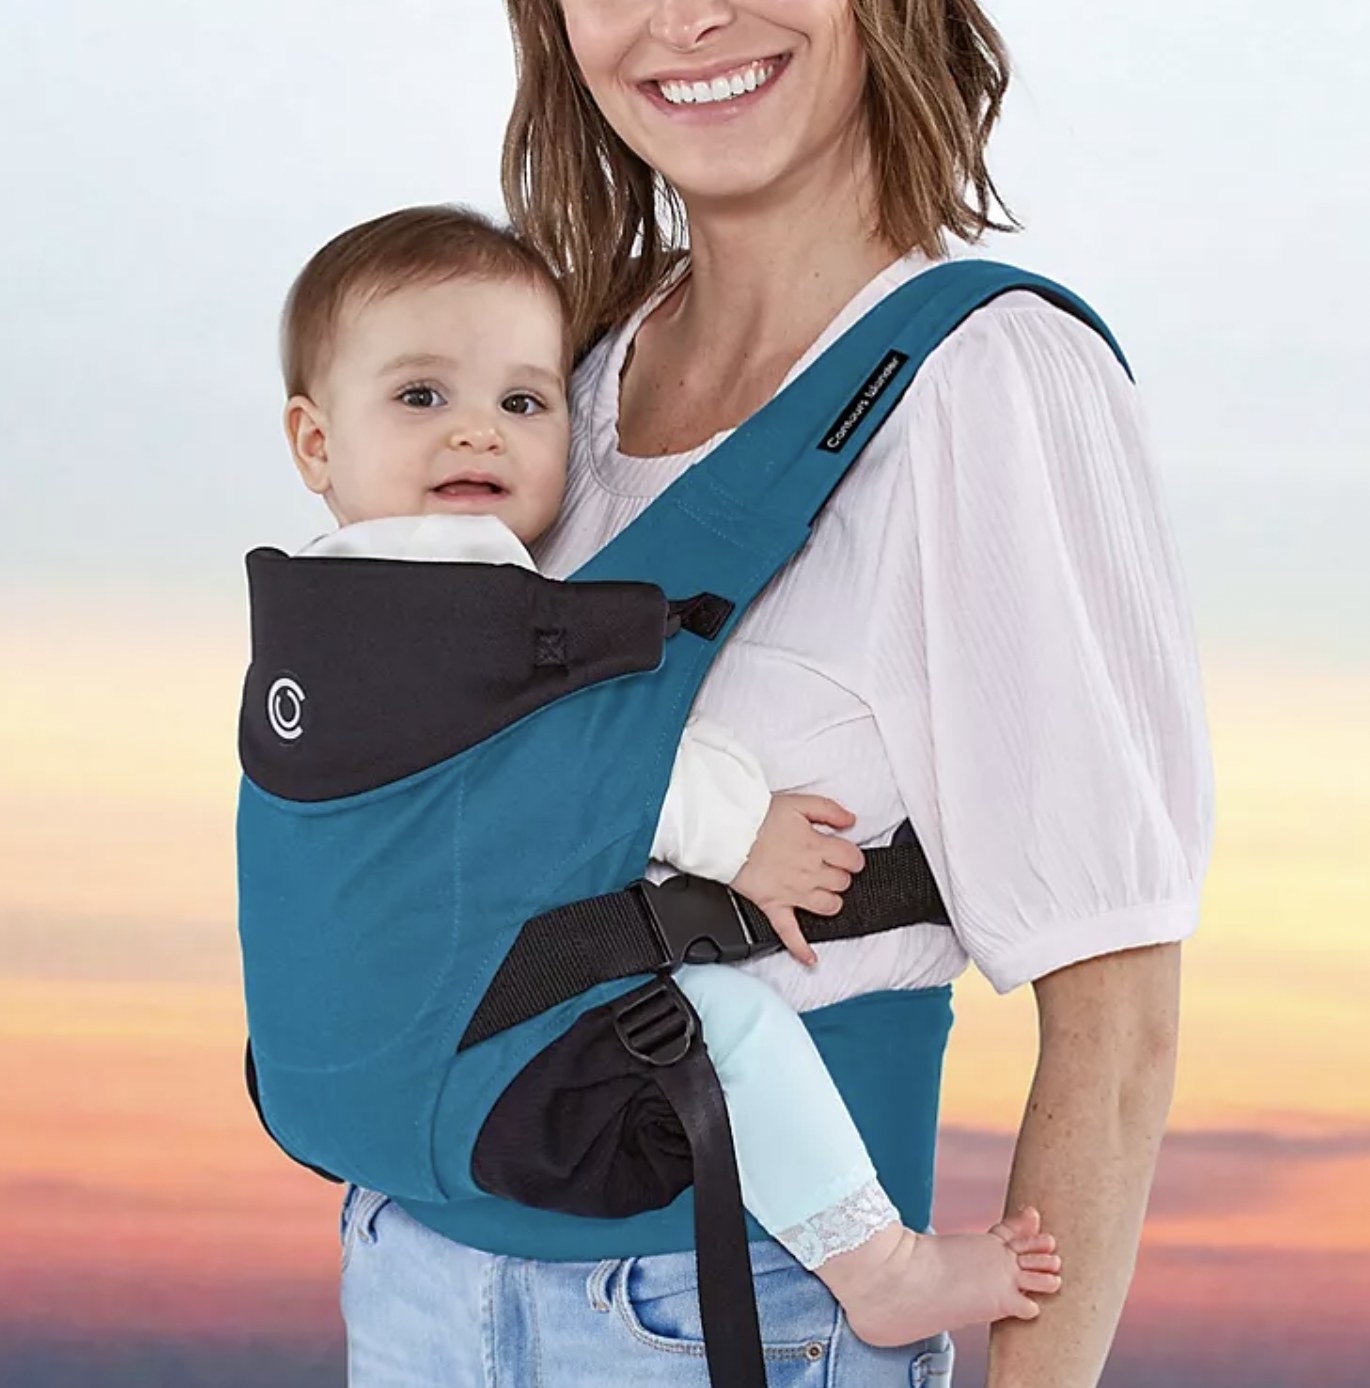 Model with toddler in the blue carrier facing forward